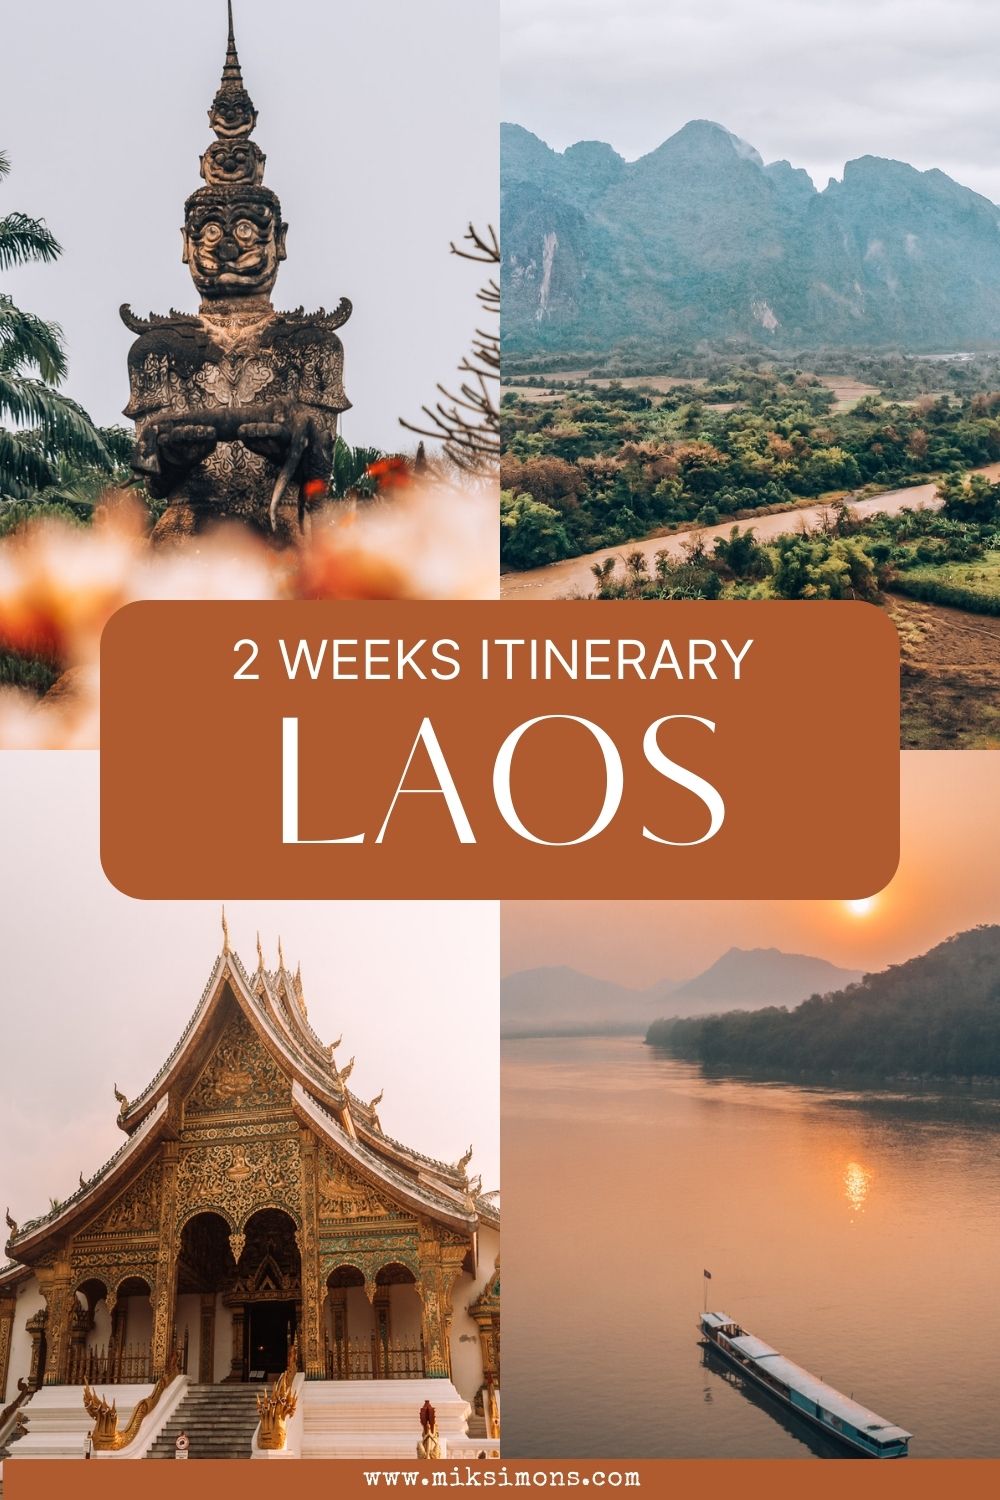 BACKPACKING IN LAOS - THE BEST 2 WEEKS IN LAOS ITINERARY1